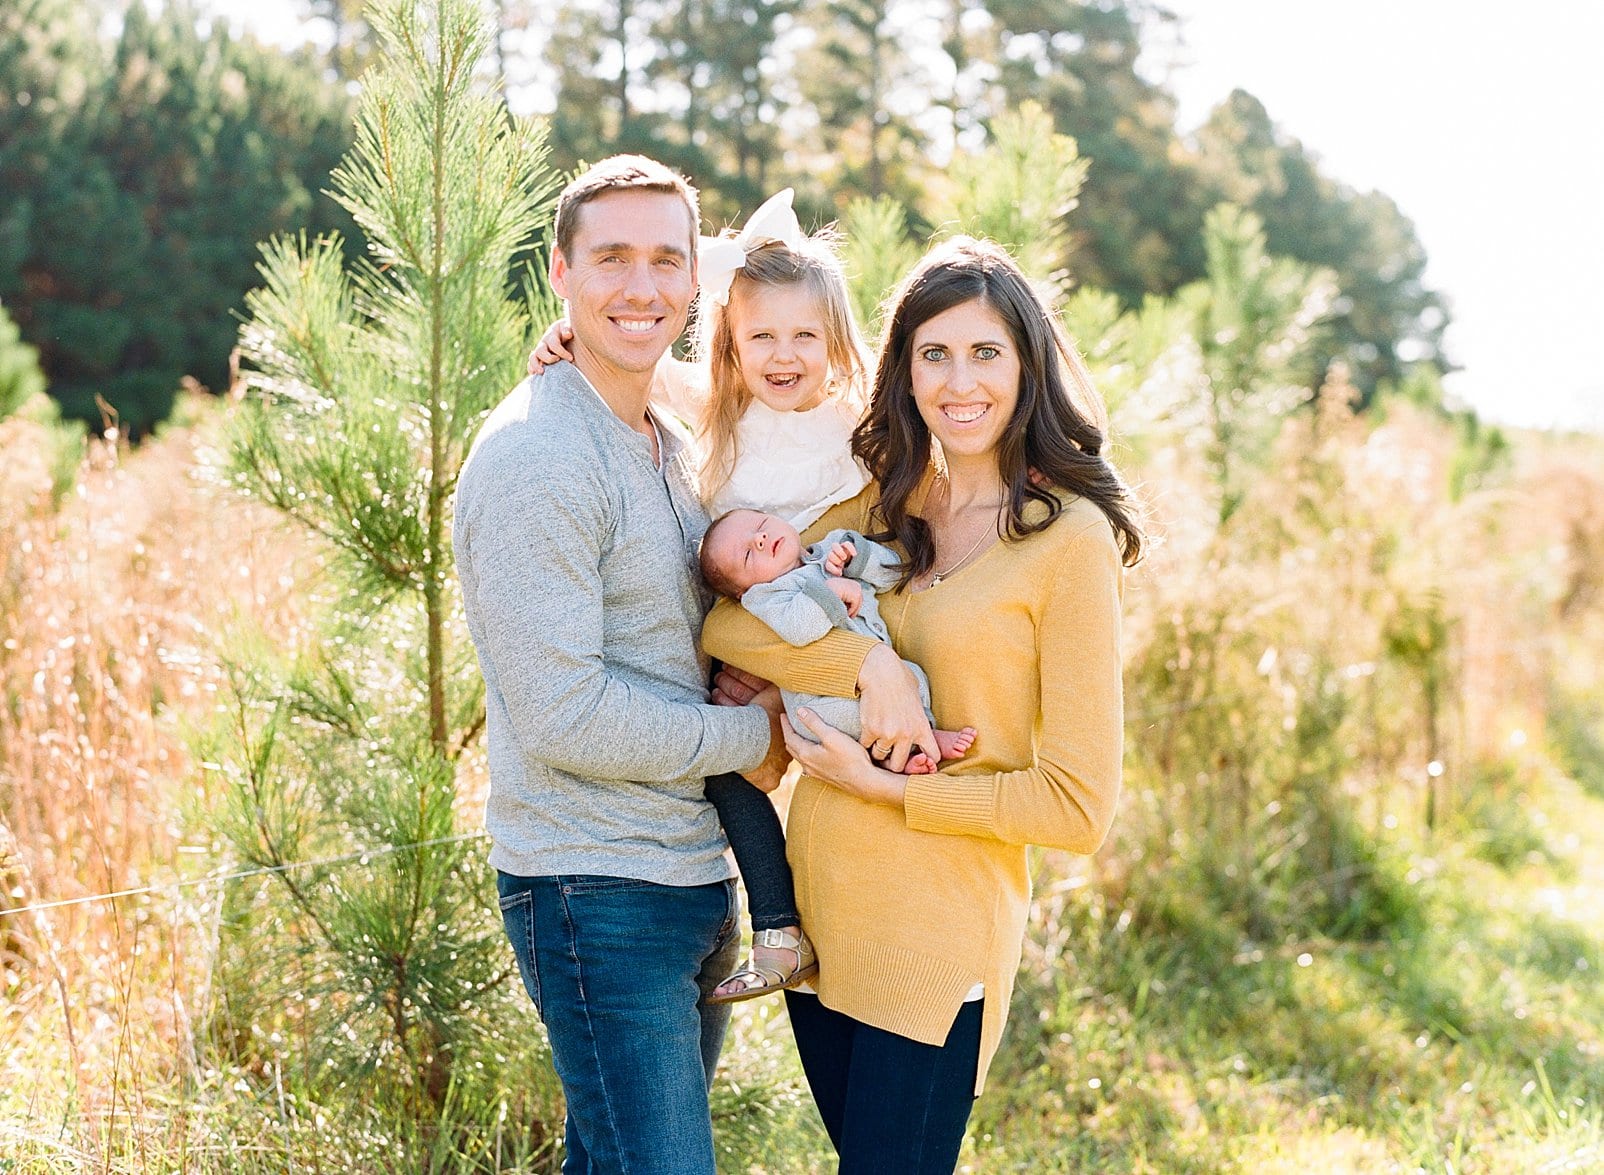 Raleigh outdoor film family session with newborn son and three year old daughter standing in front of a young pine tree field photo